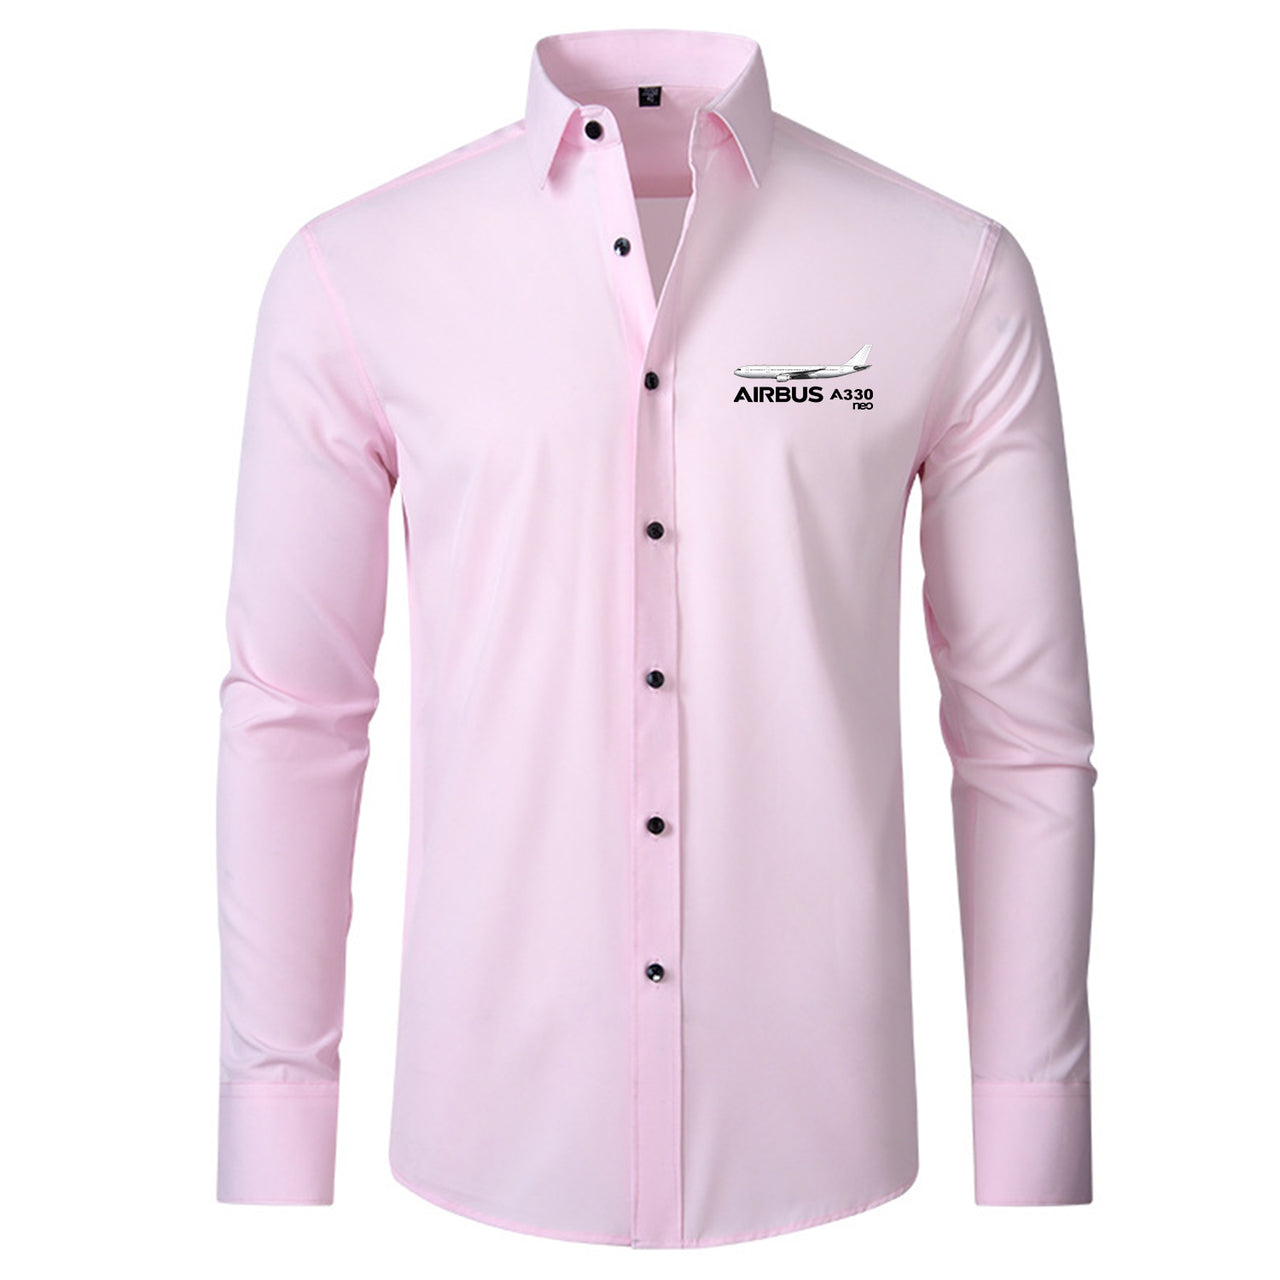 The Airbus A330neo Designed Long Sleeve Shirts